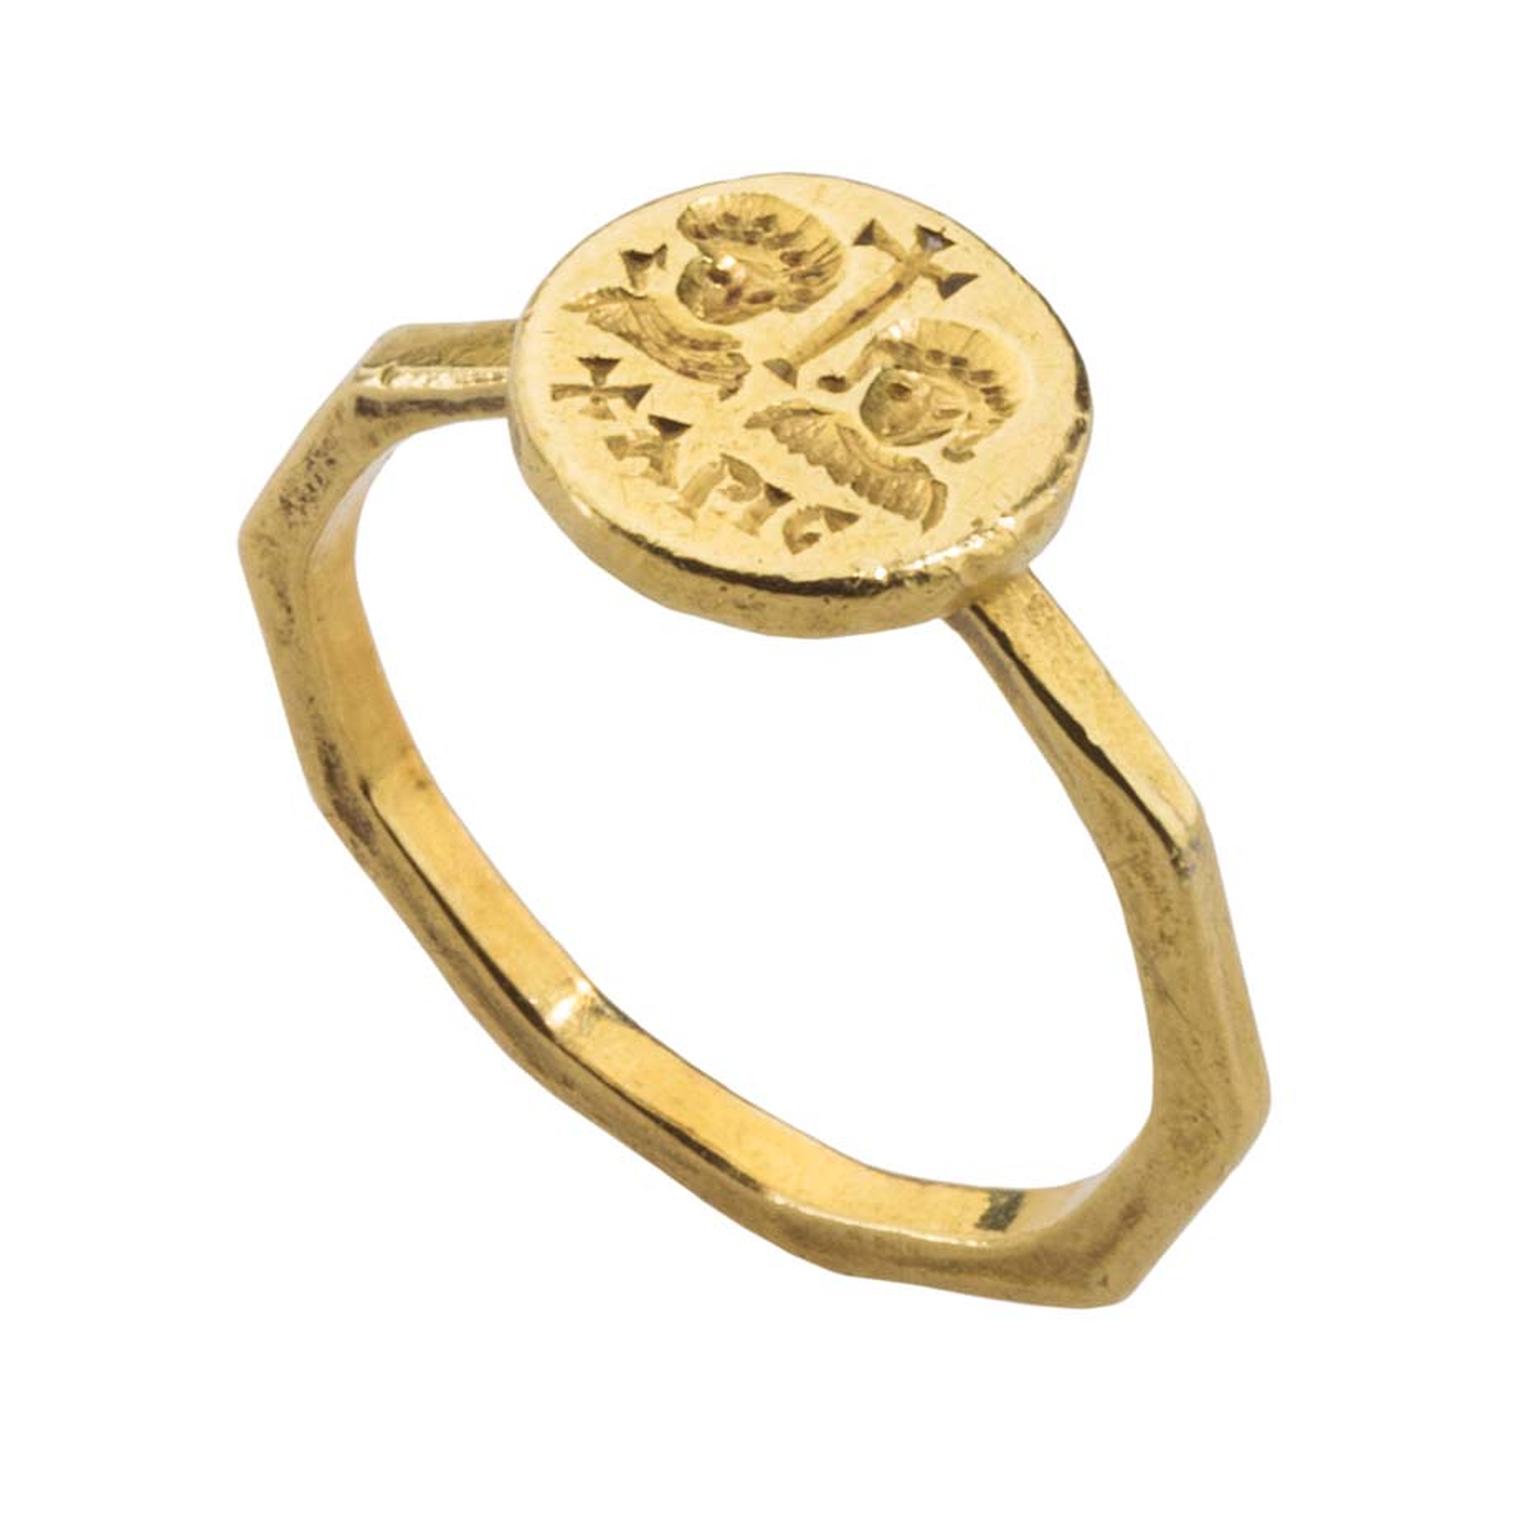 Treasures and Talismans Exhibition_Byzantine marriage ring.jpg